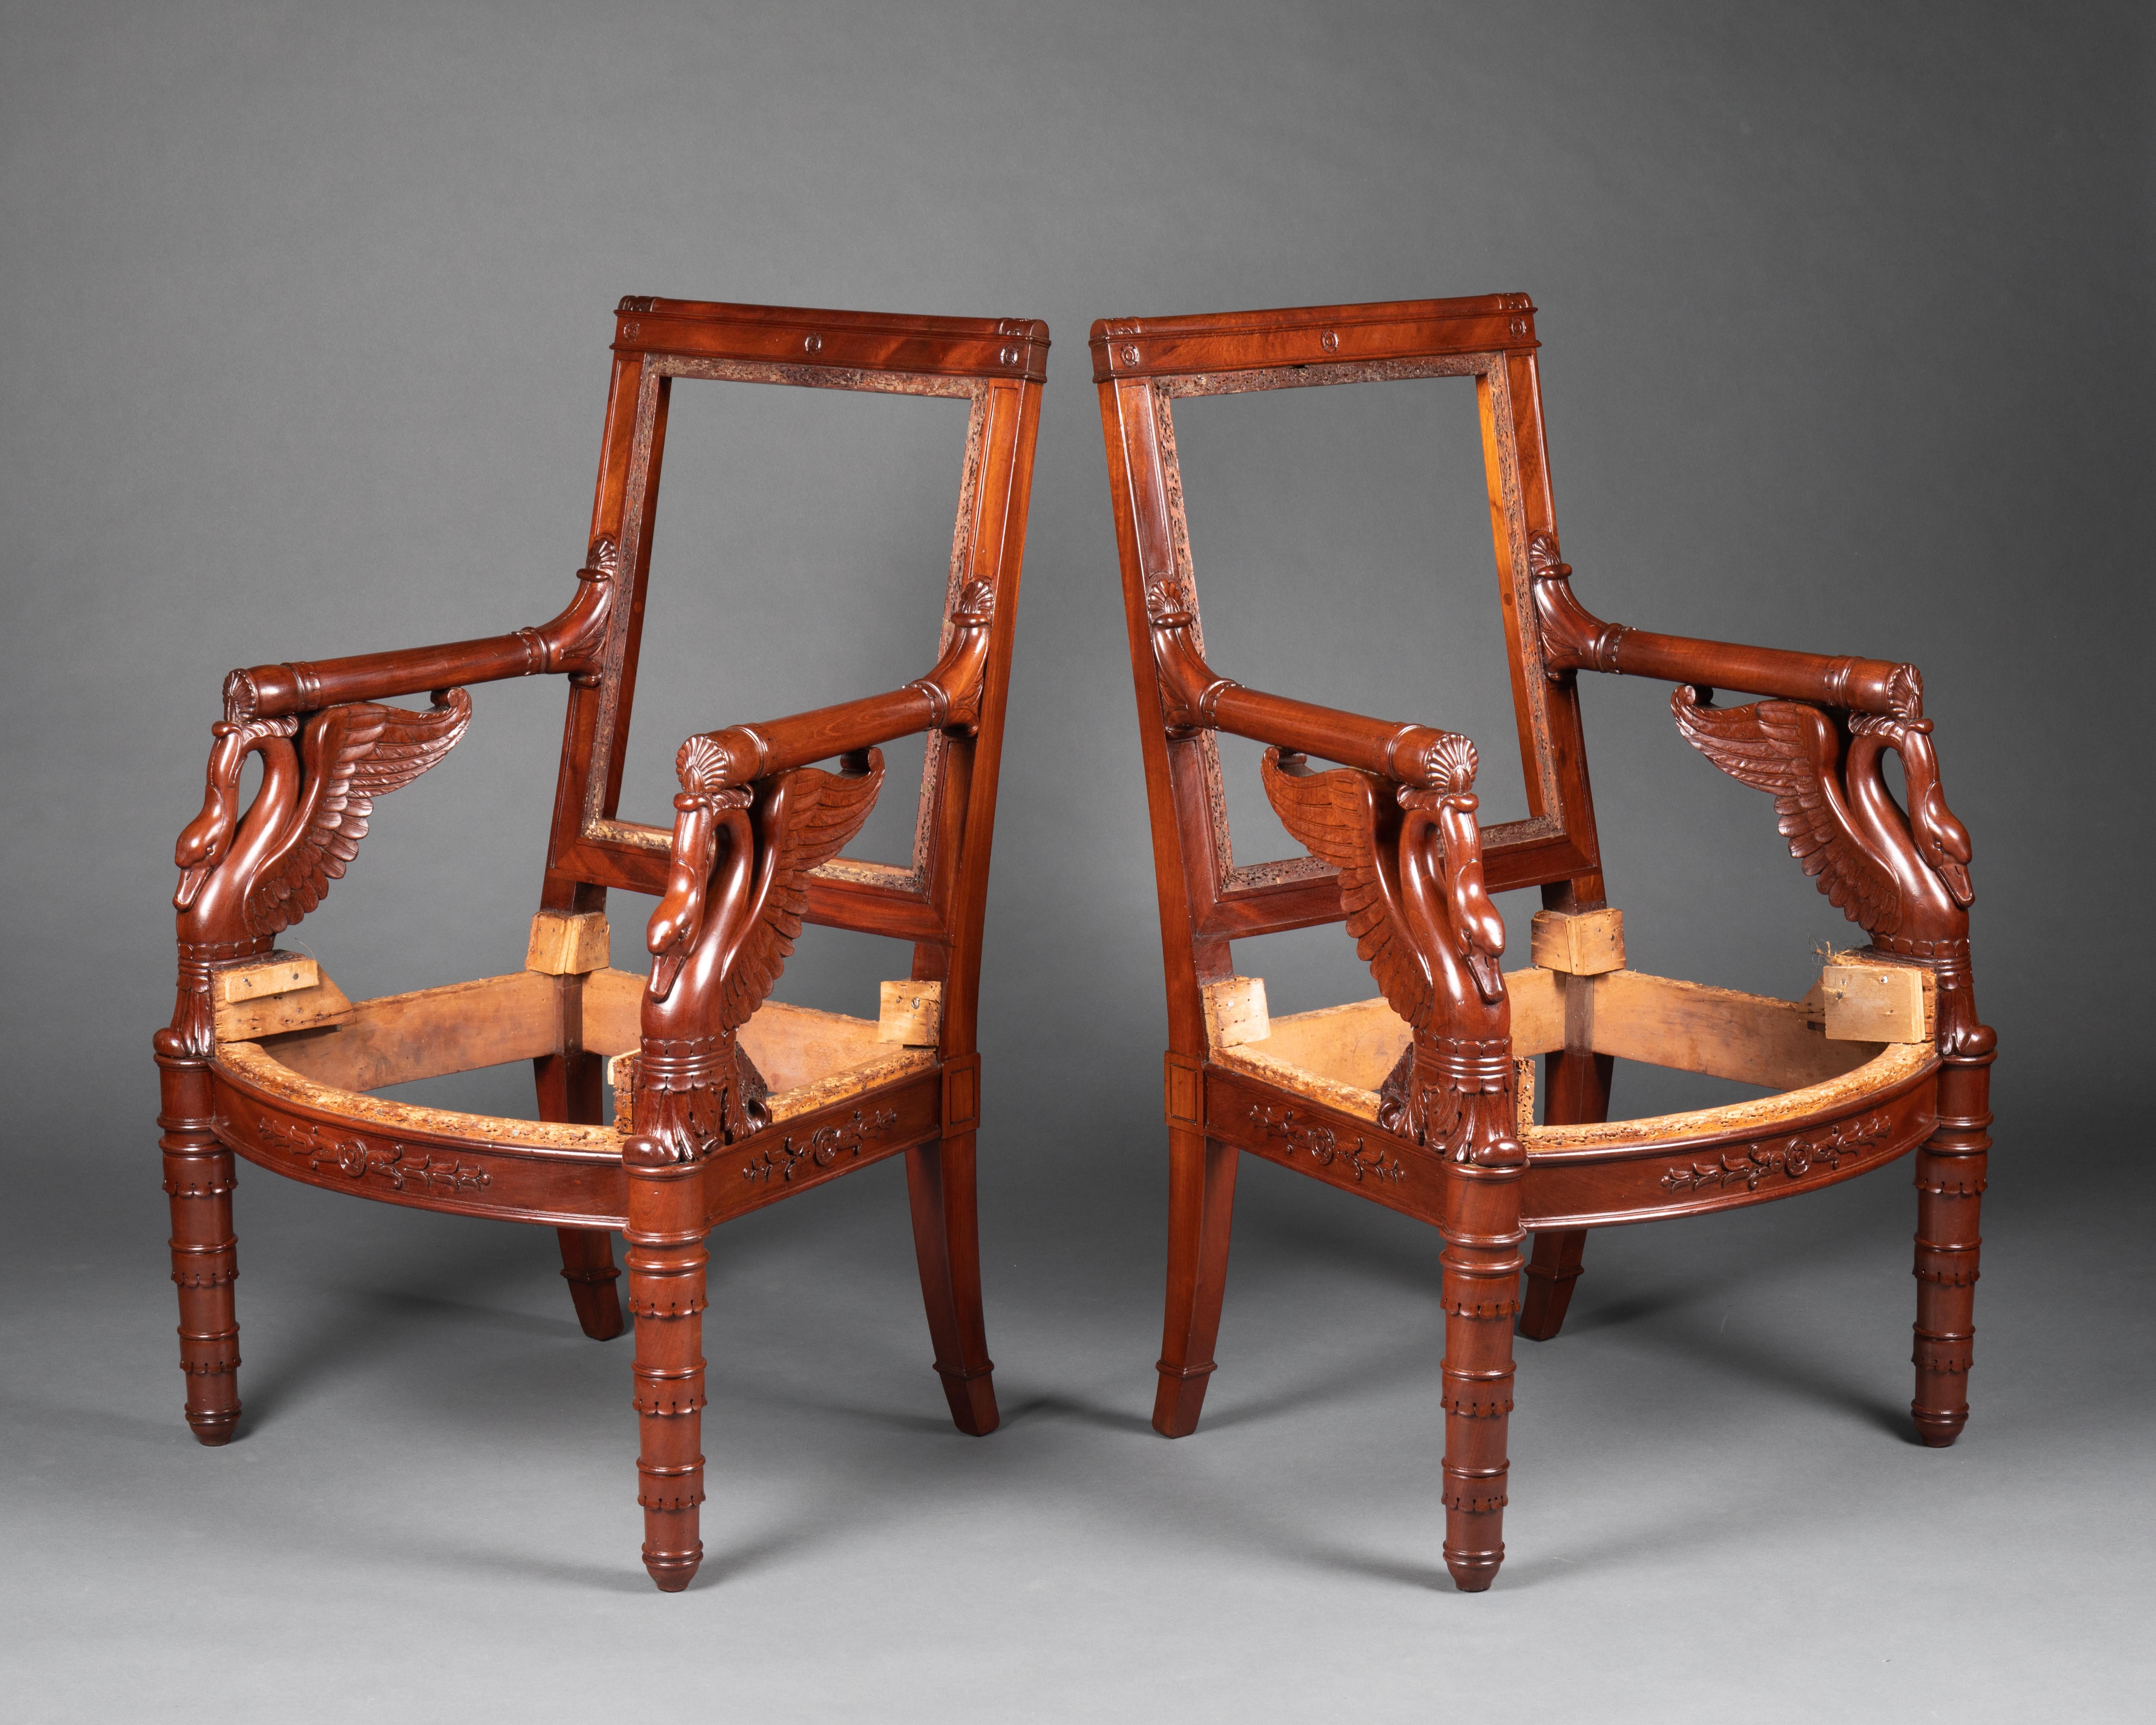 EXCEPTIONAL seats by Pierre Bellangé

PAIR OF ARMCHAIRS, circa 1805
Mahogany with mahogany veneer. Powerful tapered front legs with three scalloped rings, and sabre back legs.
Slightly arched front stretcher with sculpted decoration centered around